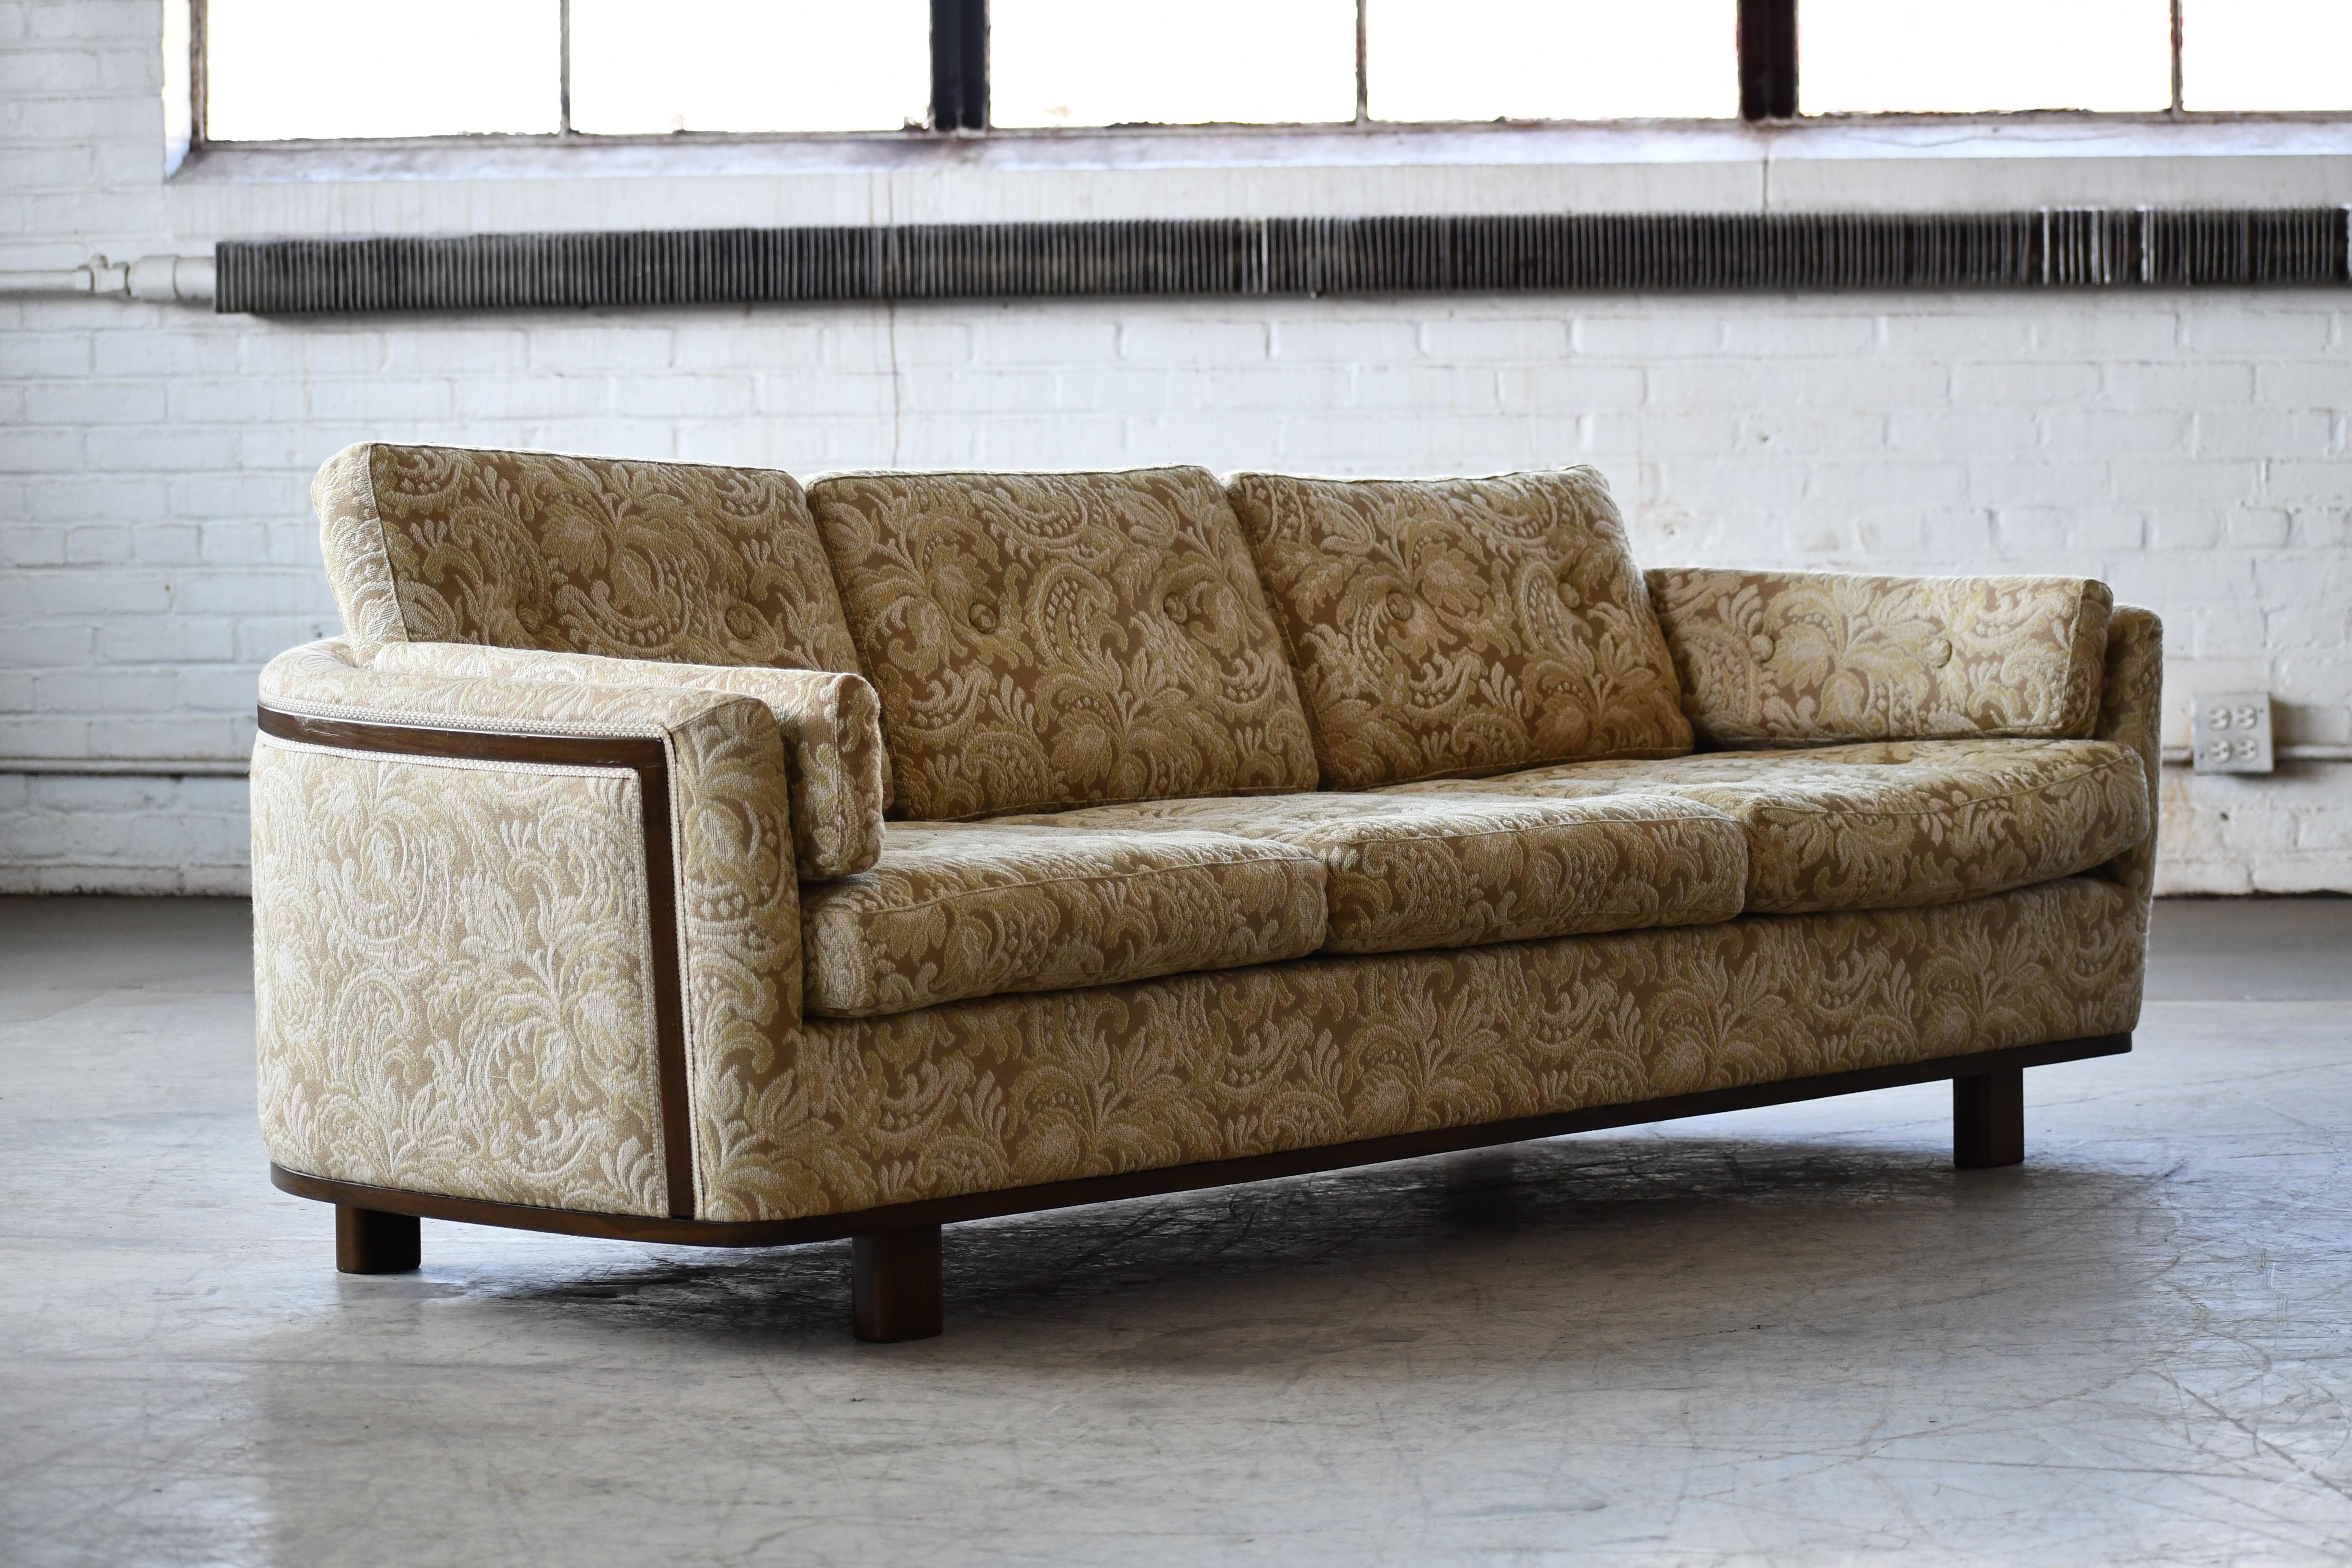 Swedish midcentury modern upholstered sofa with walnut colored wood accents and base made by Holm's Fabriker AB. The wooden accents are built in to the sofa according to Swedish tradition and adds an upscale flair and elegance. Rounded organic